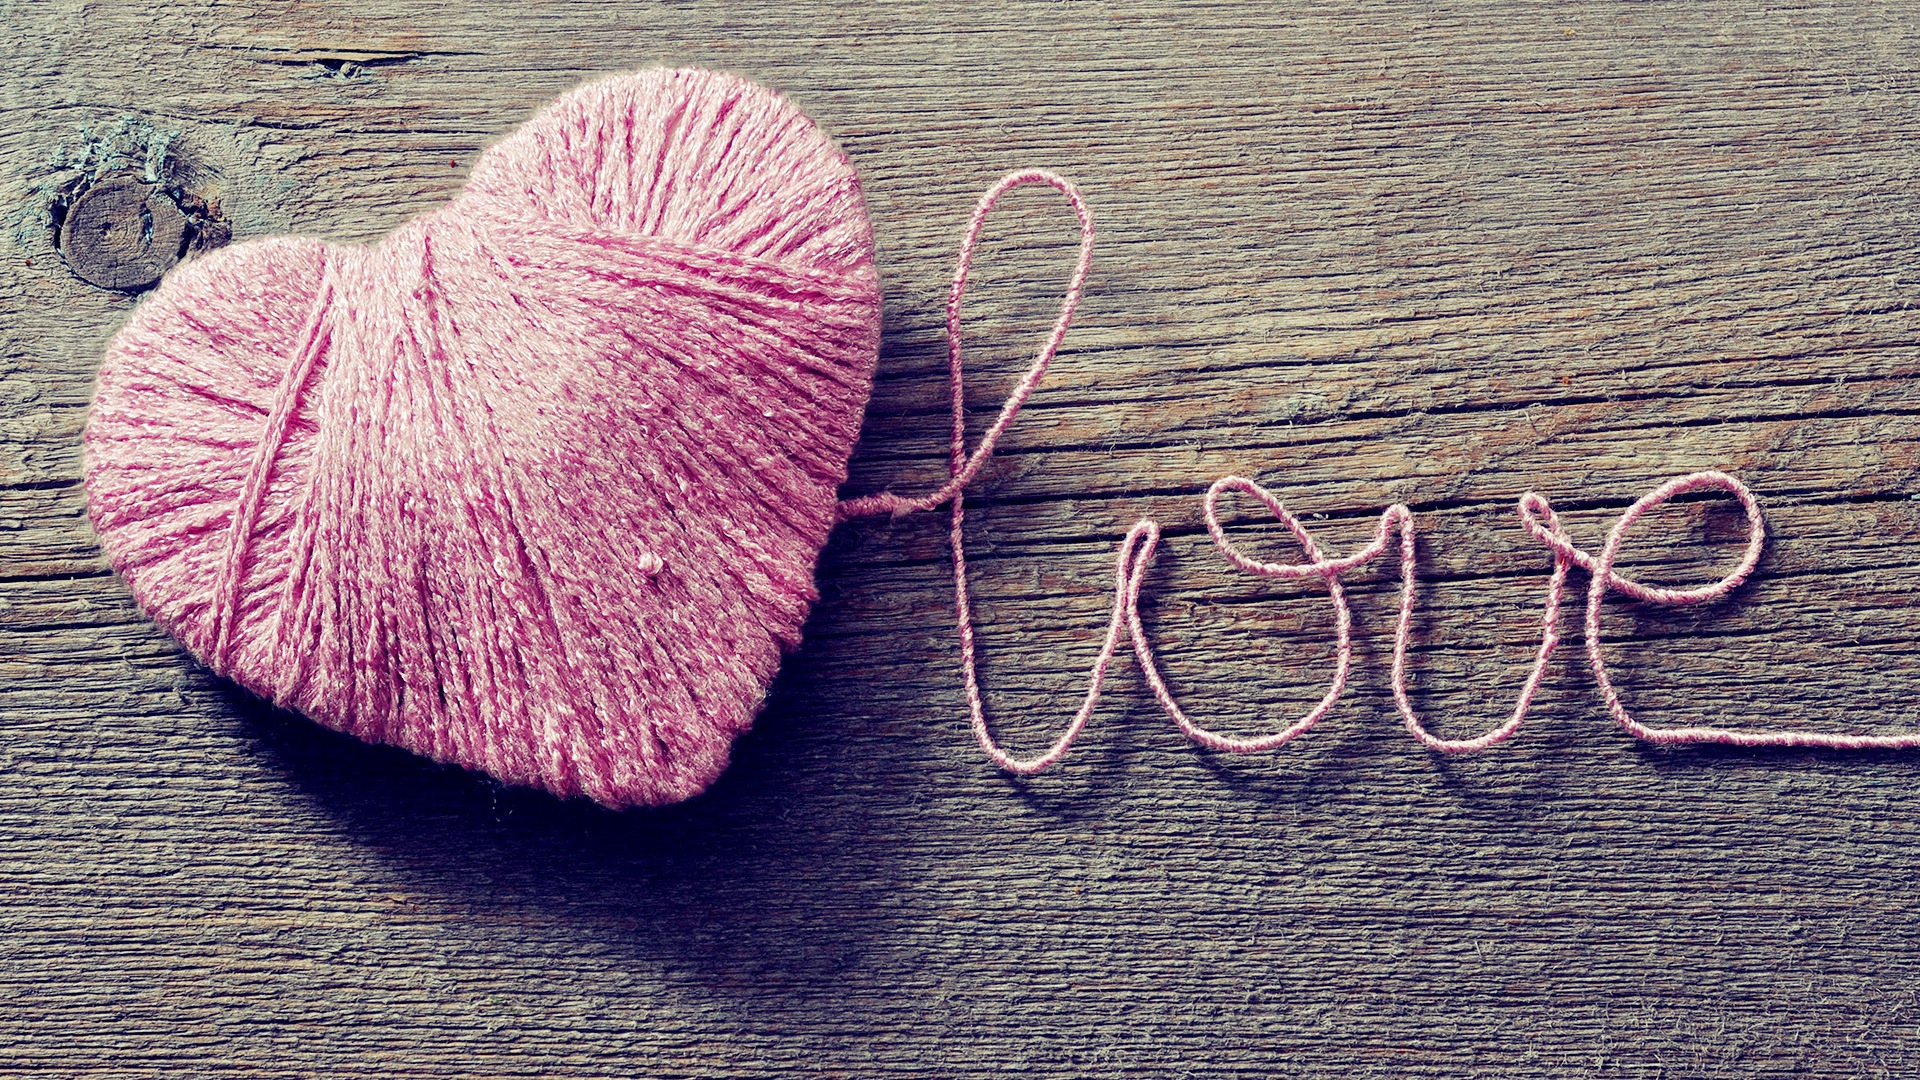 The theme of love, creative heart-shaped HD wallpapers #10 - 1920x1080